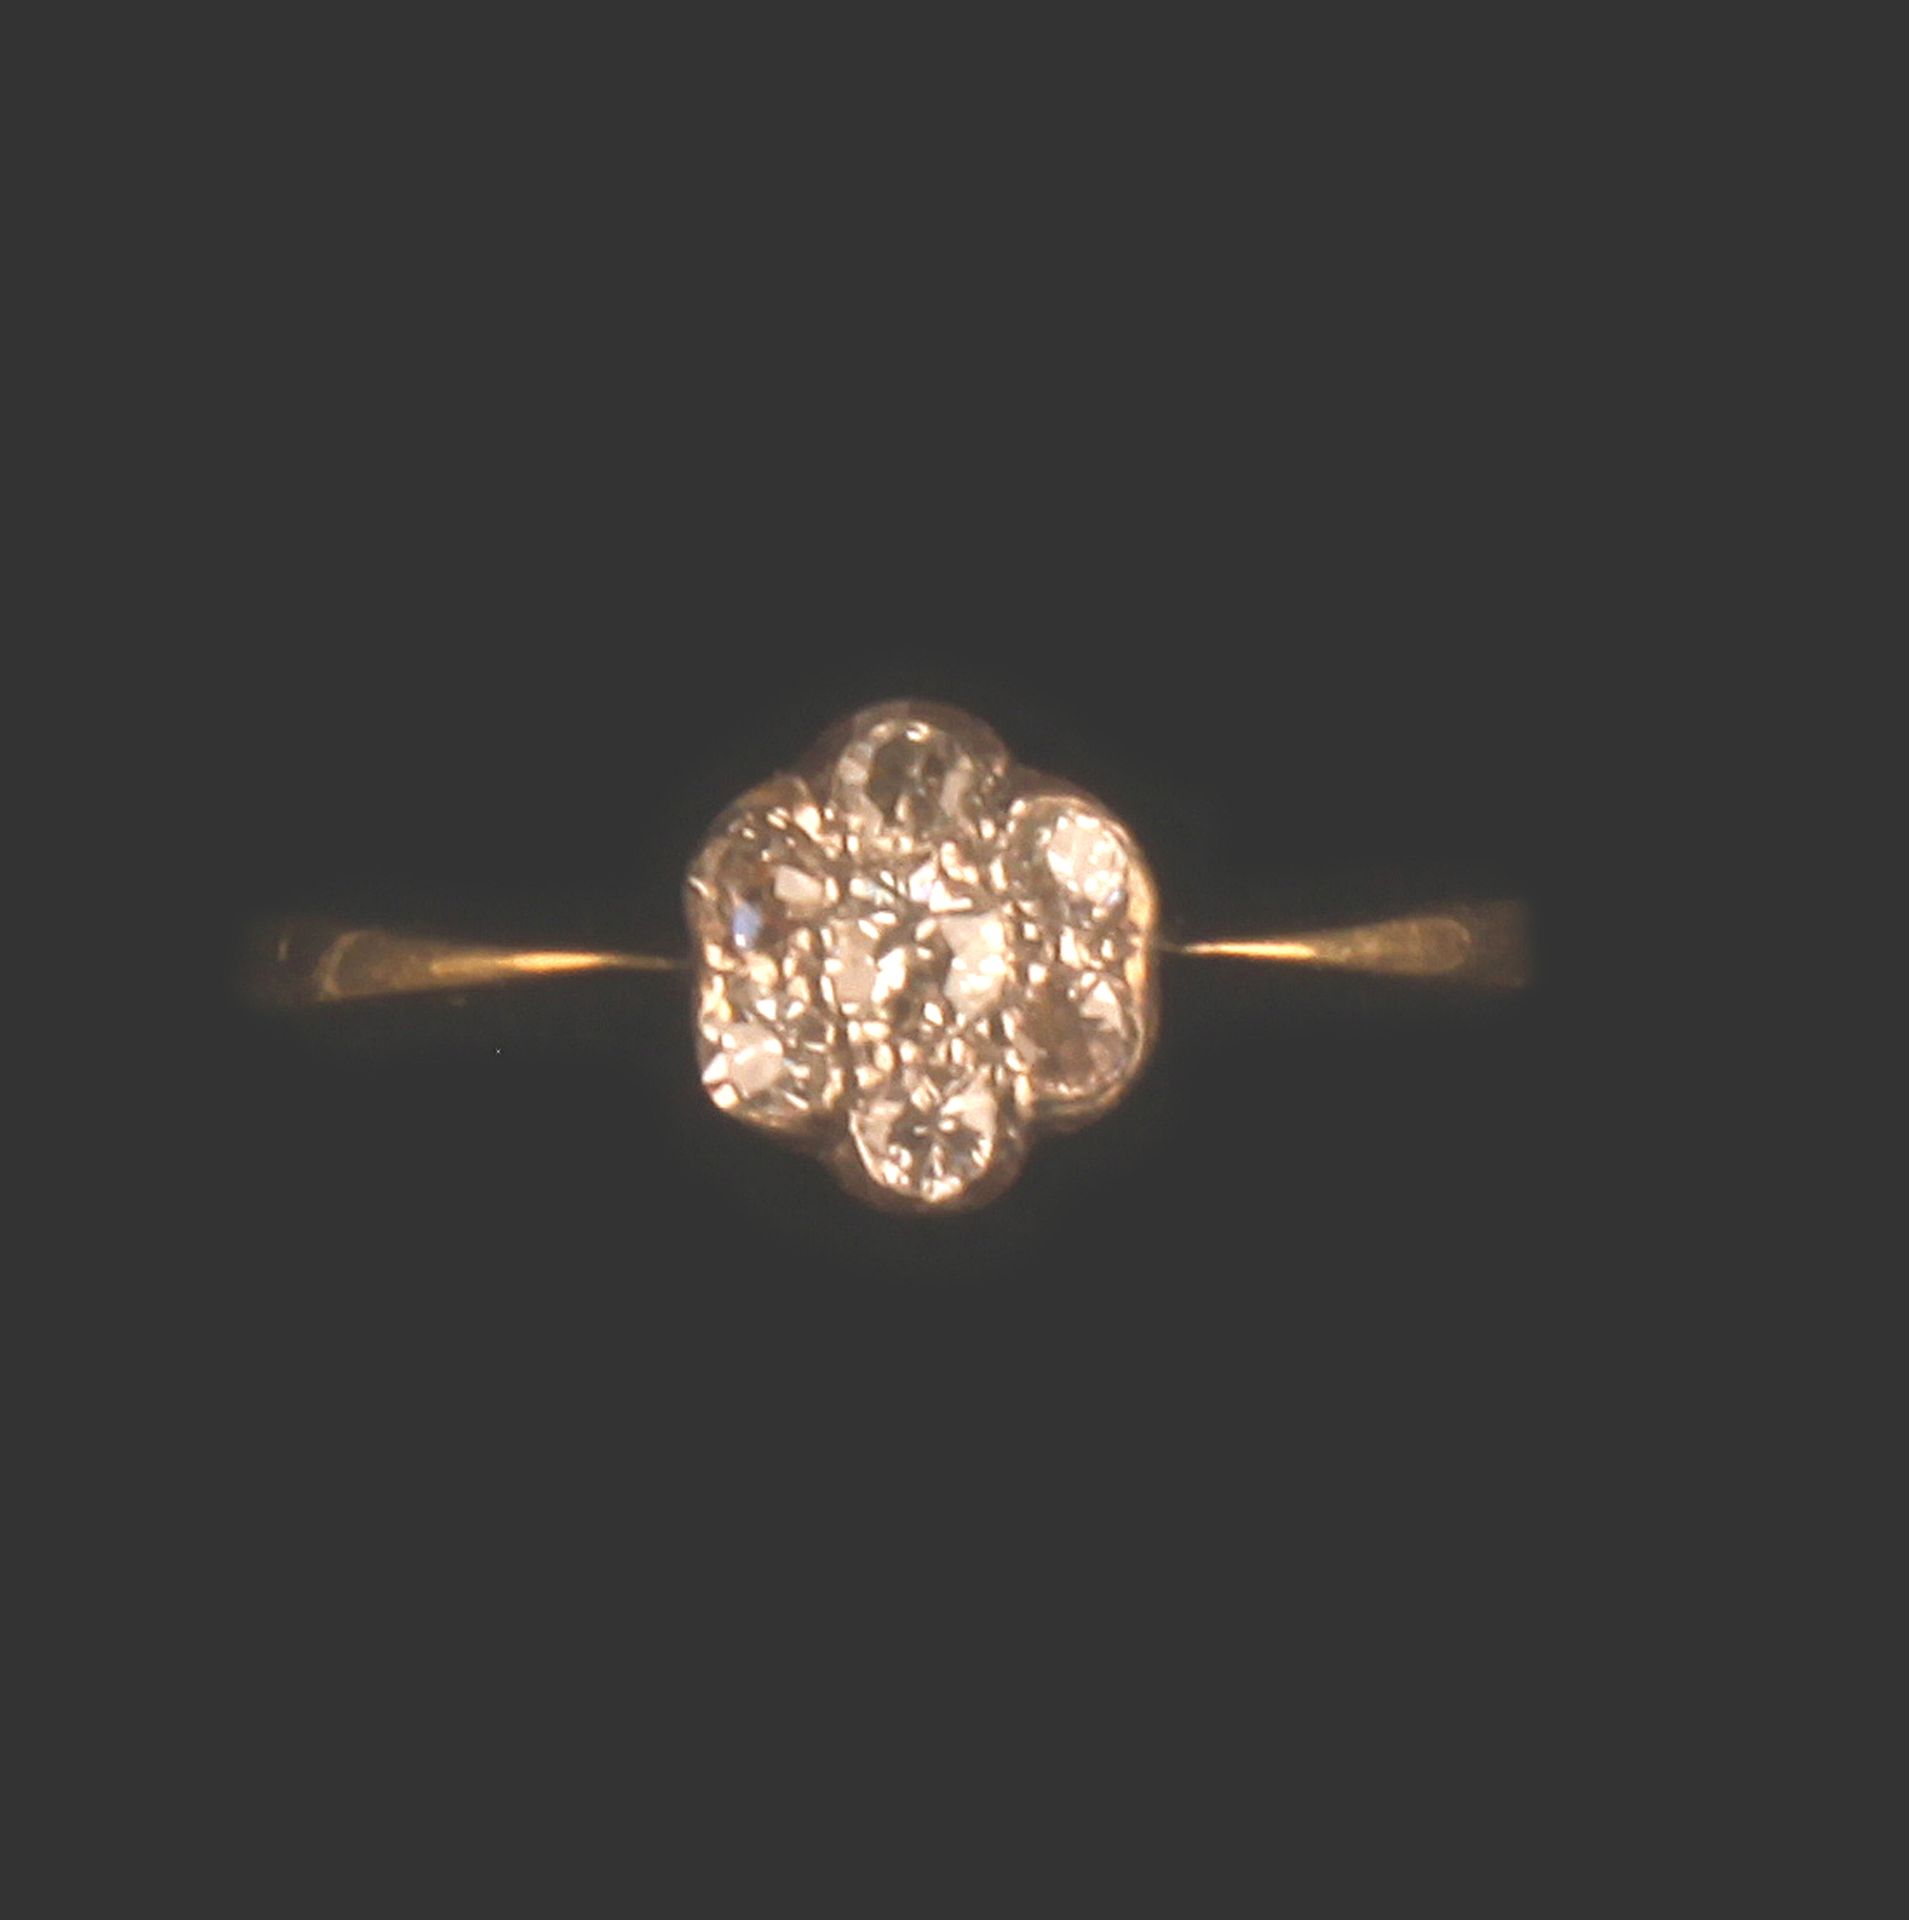 10ct GOLD DIAMOND CLUSTER RING - Image 3 of 4